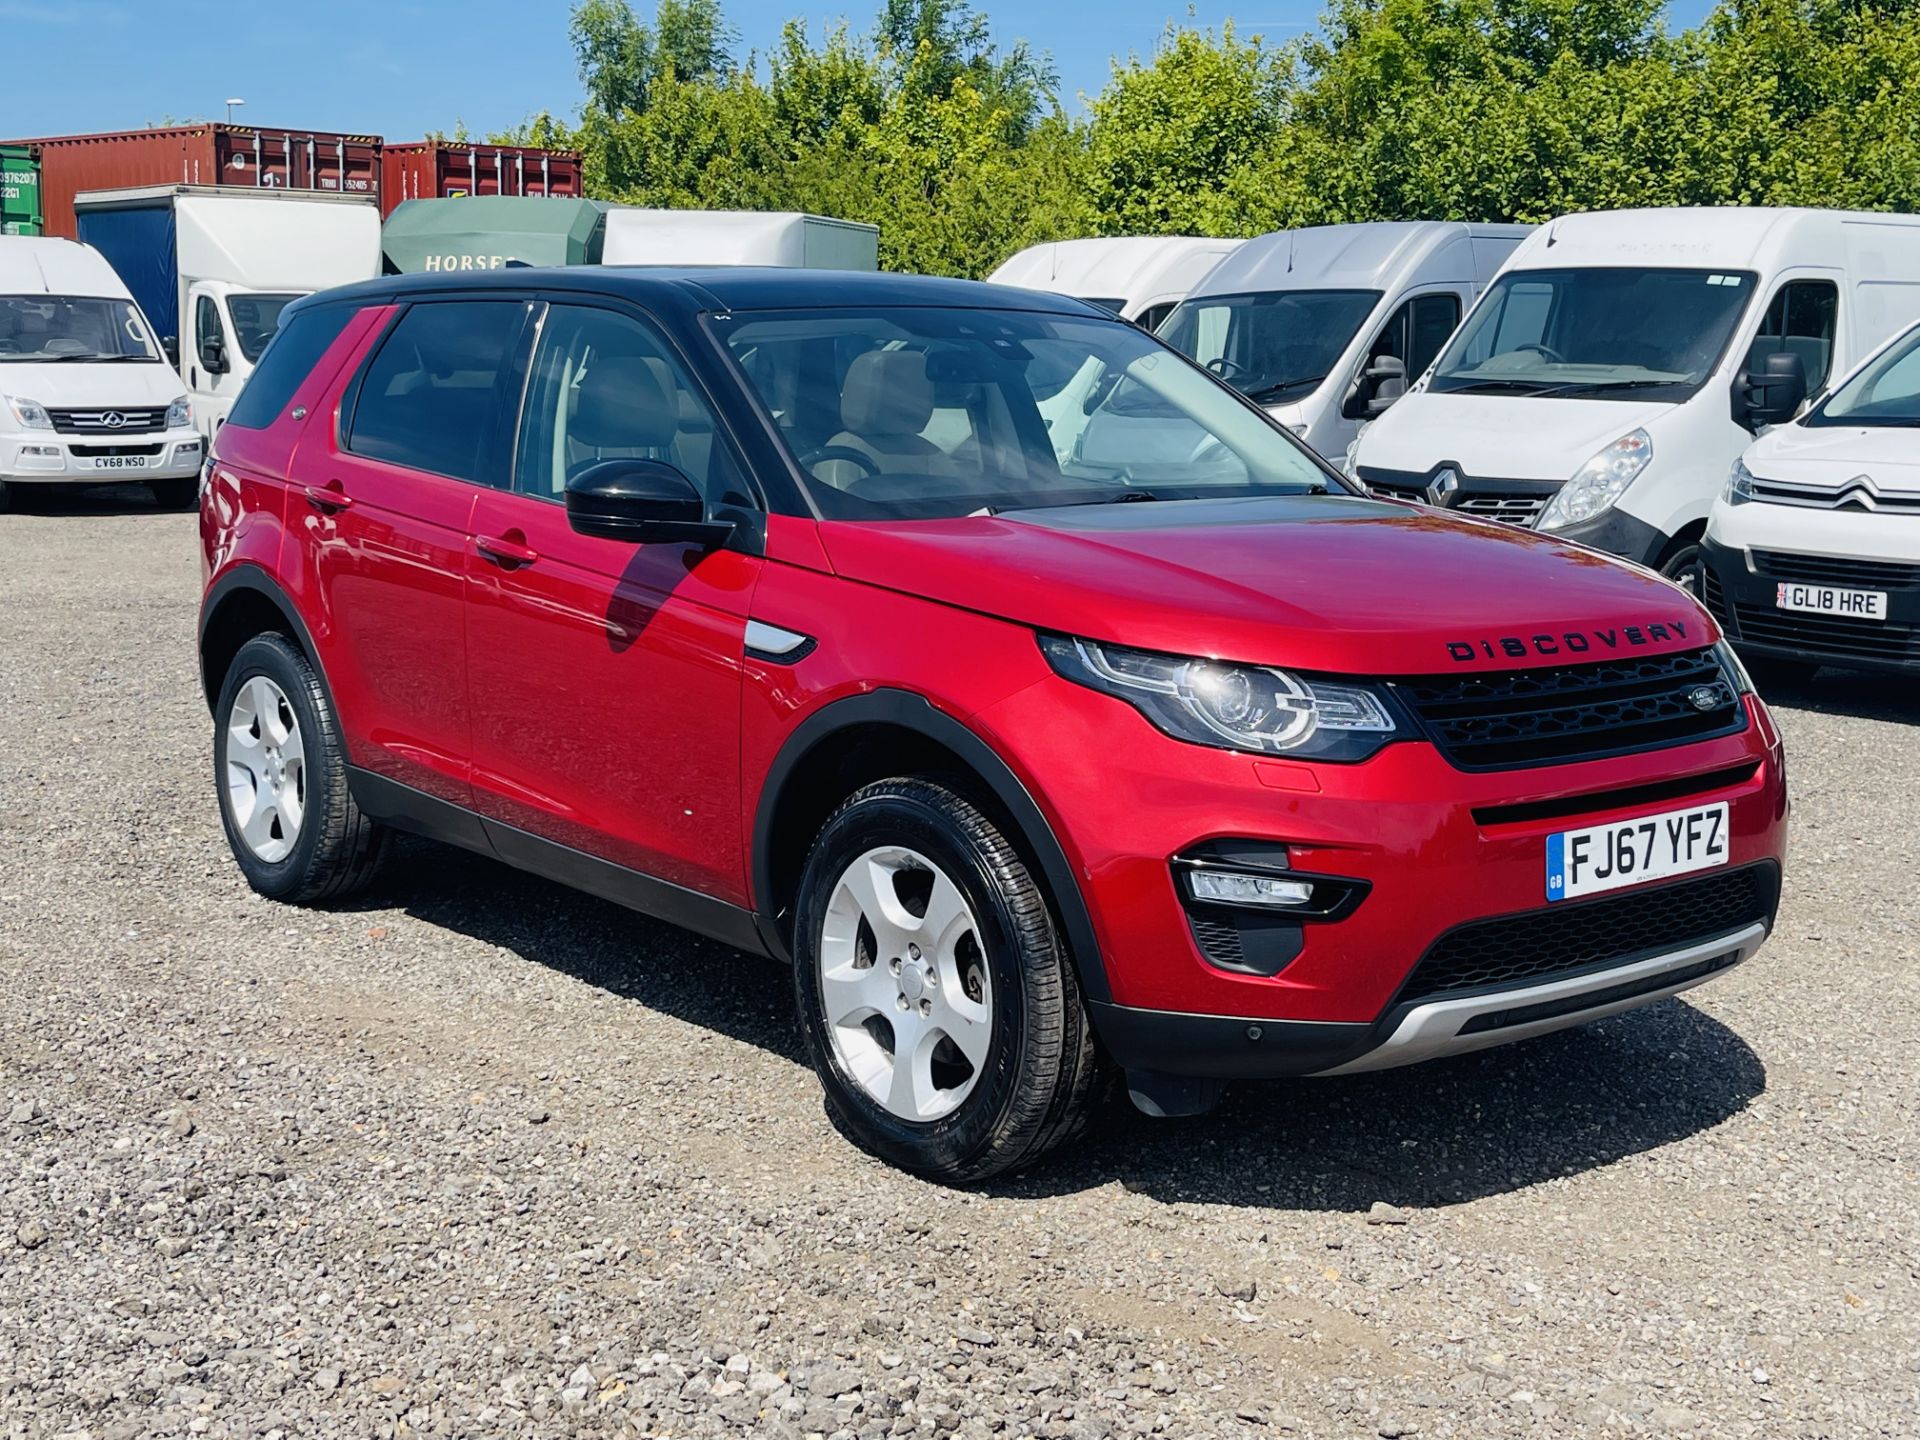 Land Rover Discovery Sport HSE 2.0 ED4 2017 '67 Reg' Sat Nav - Panoramic Glass Roof - ULEZ Compliant - Image 2 of 33